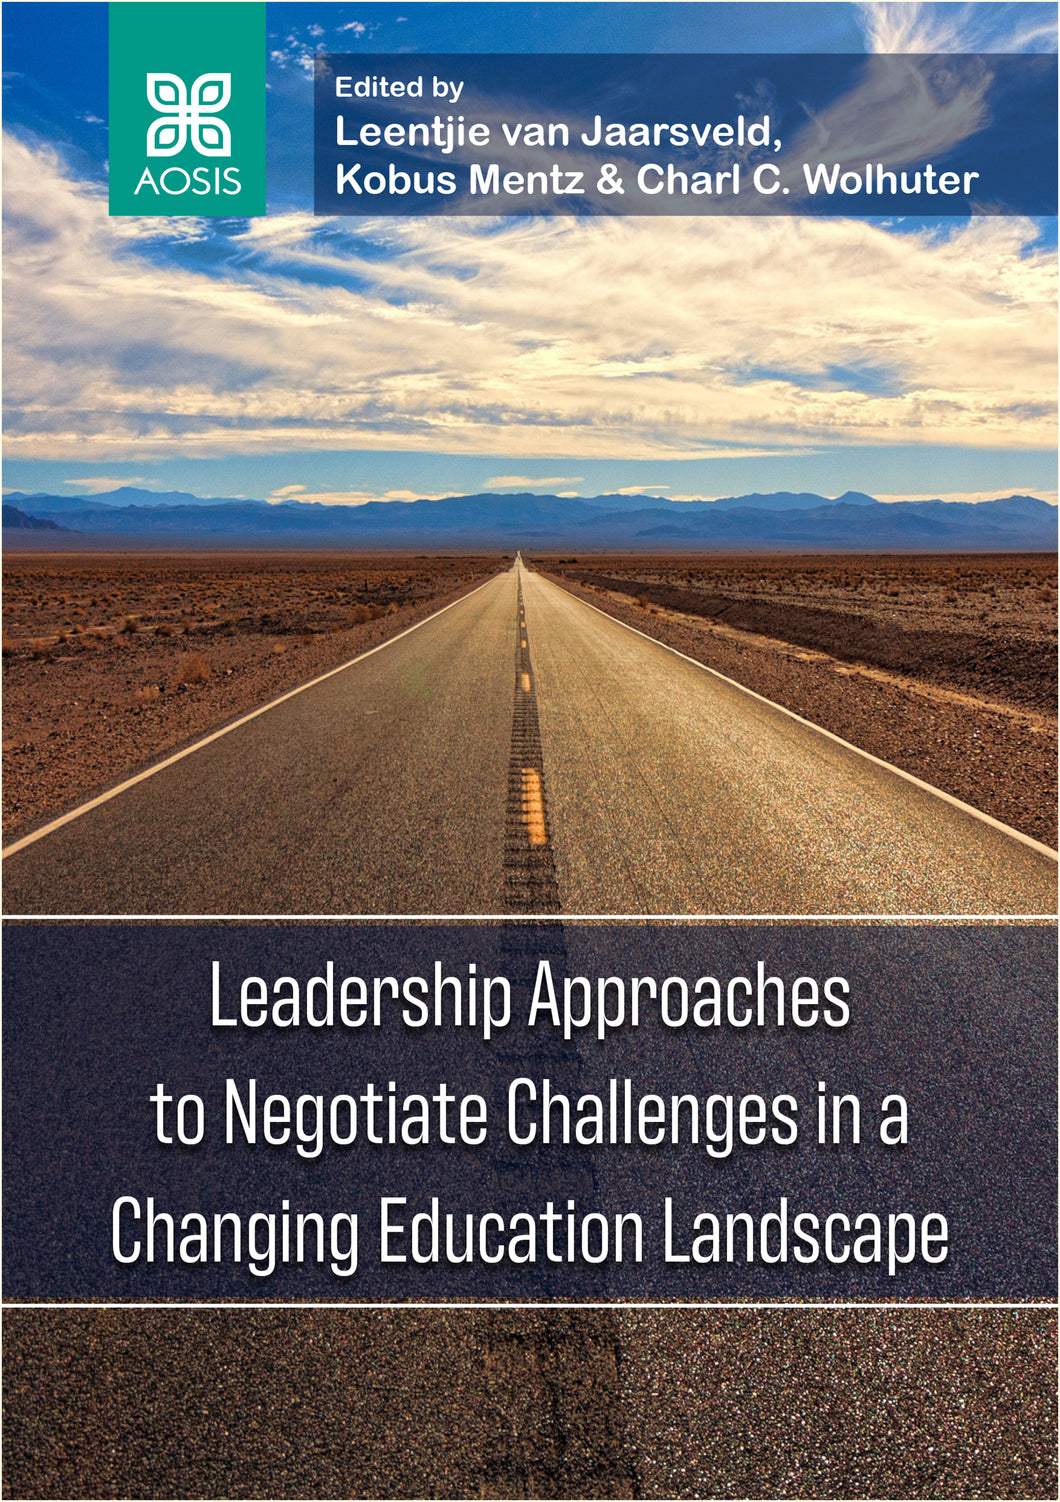 Leadership Approaches to Negotiate Challenges in a Changing Education Landscape (Print copy)